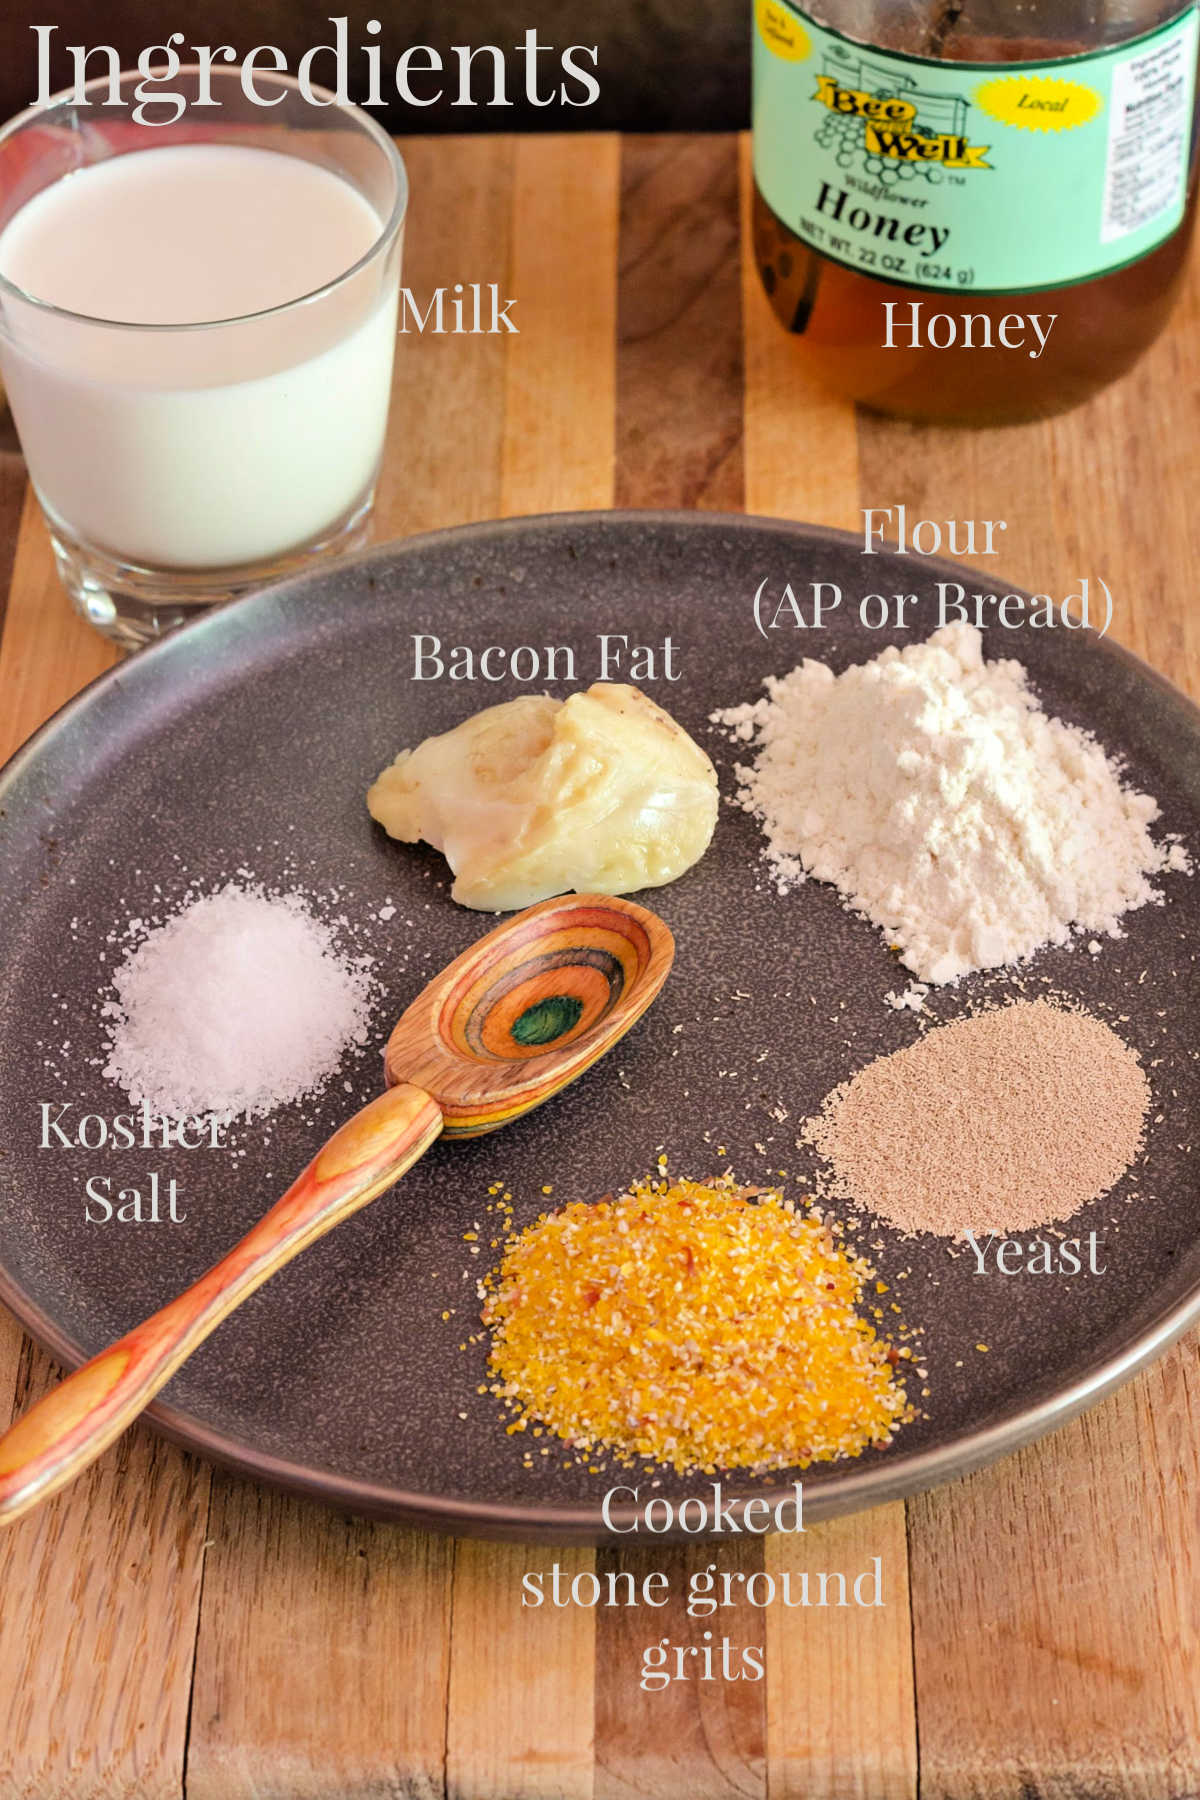 All ingredients to make grits bread.